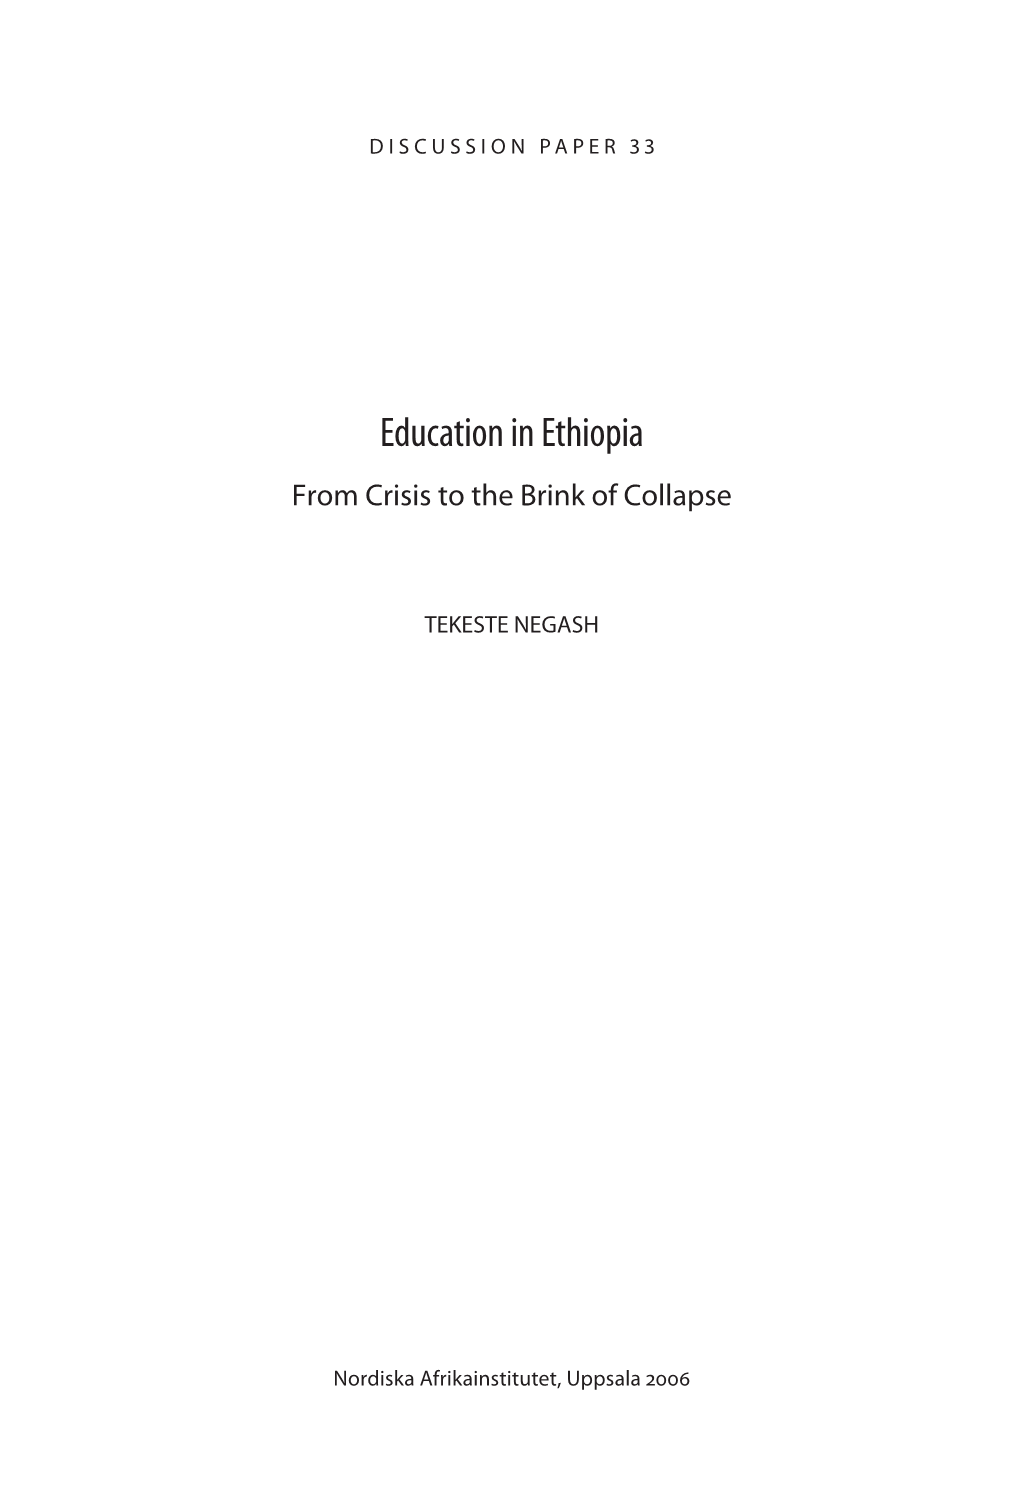 Education in Ethiopia from Crisis to the Brink of Collapse